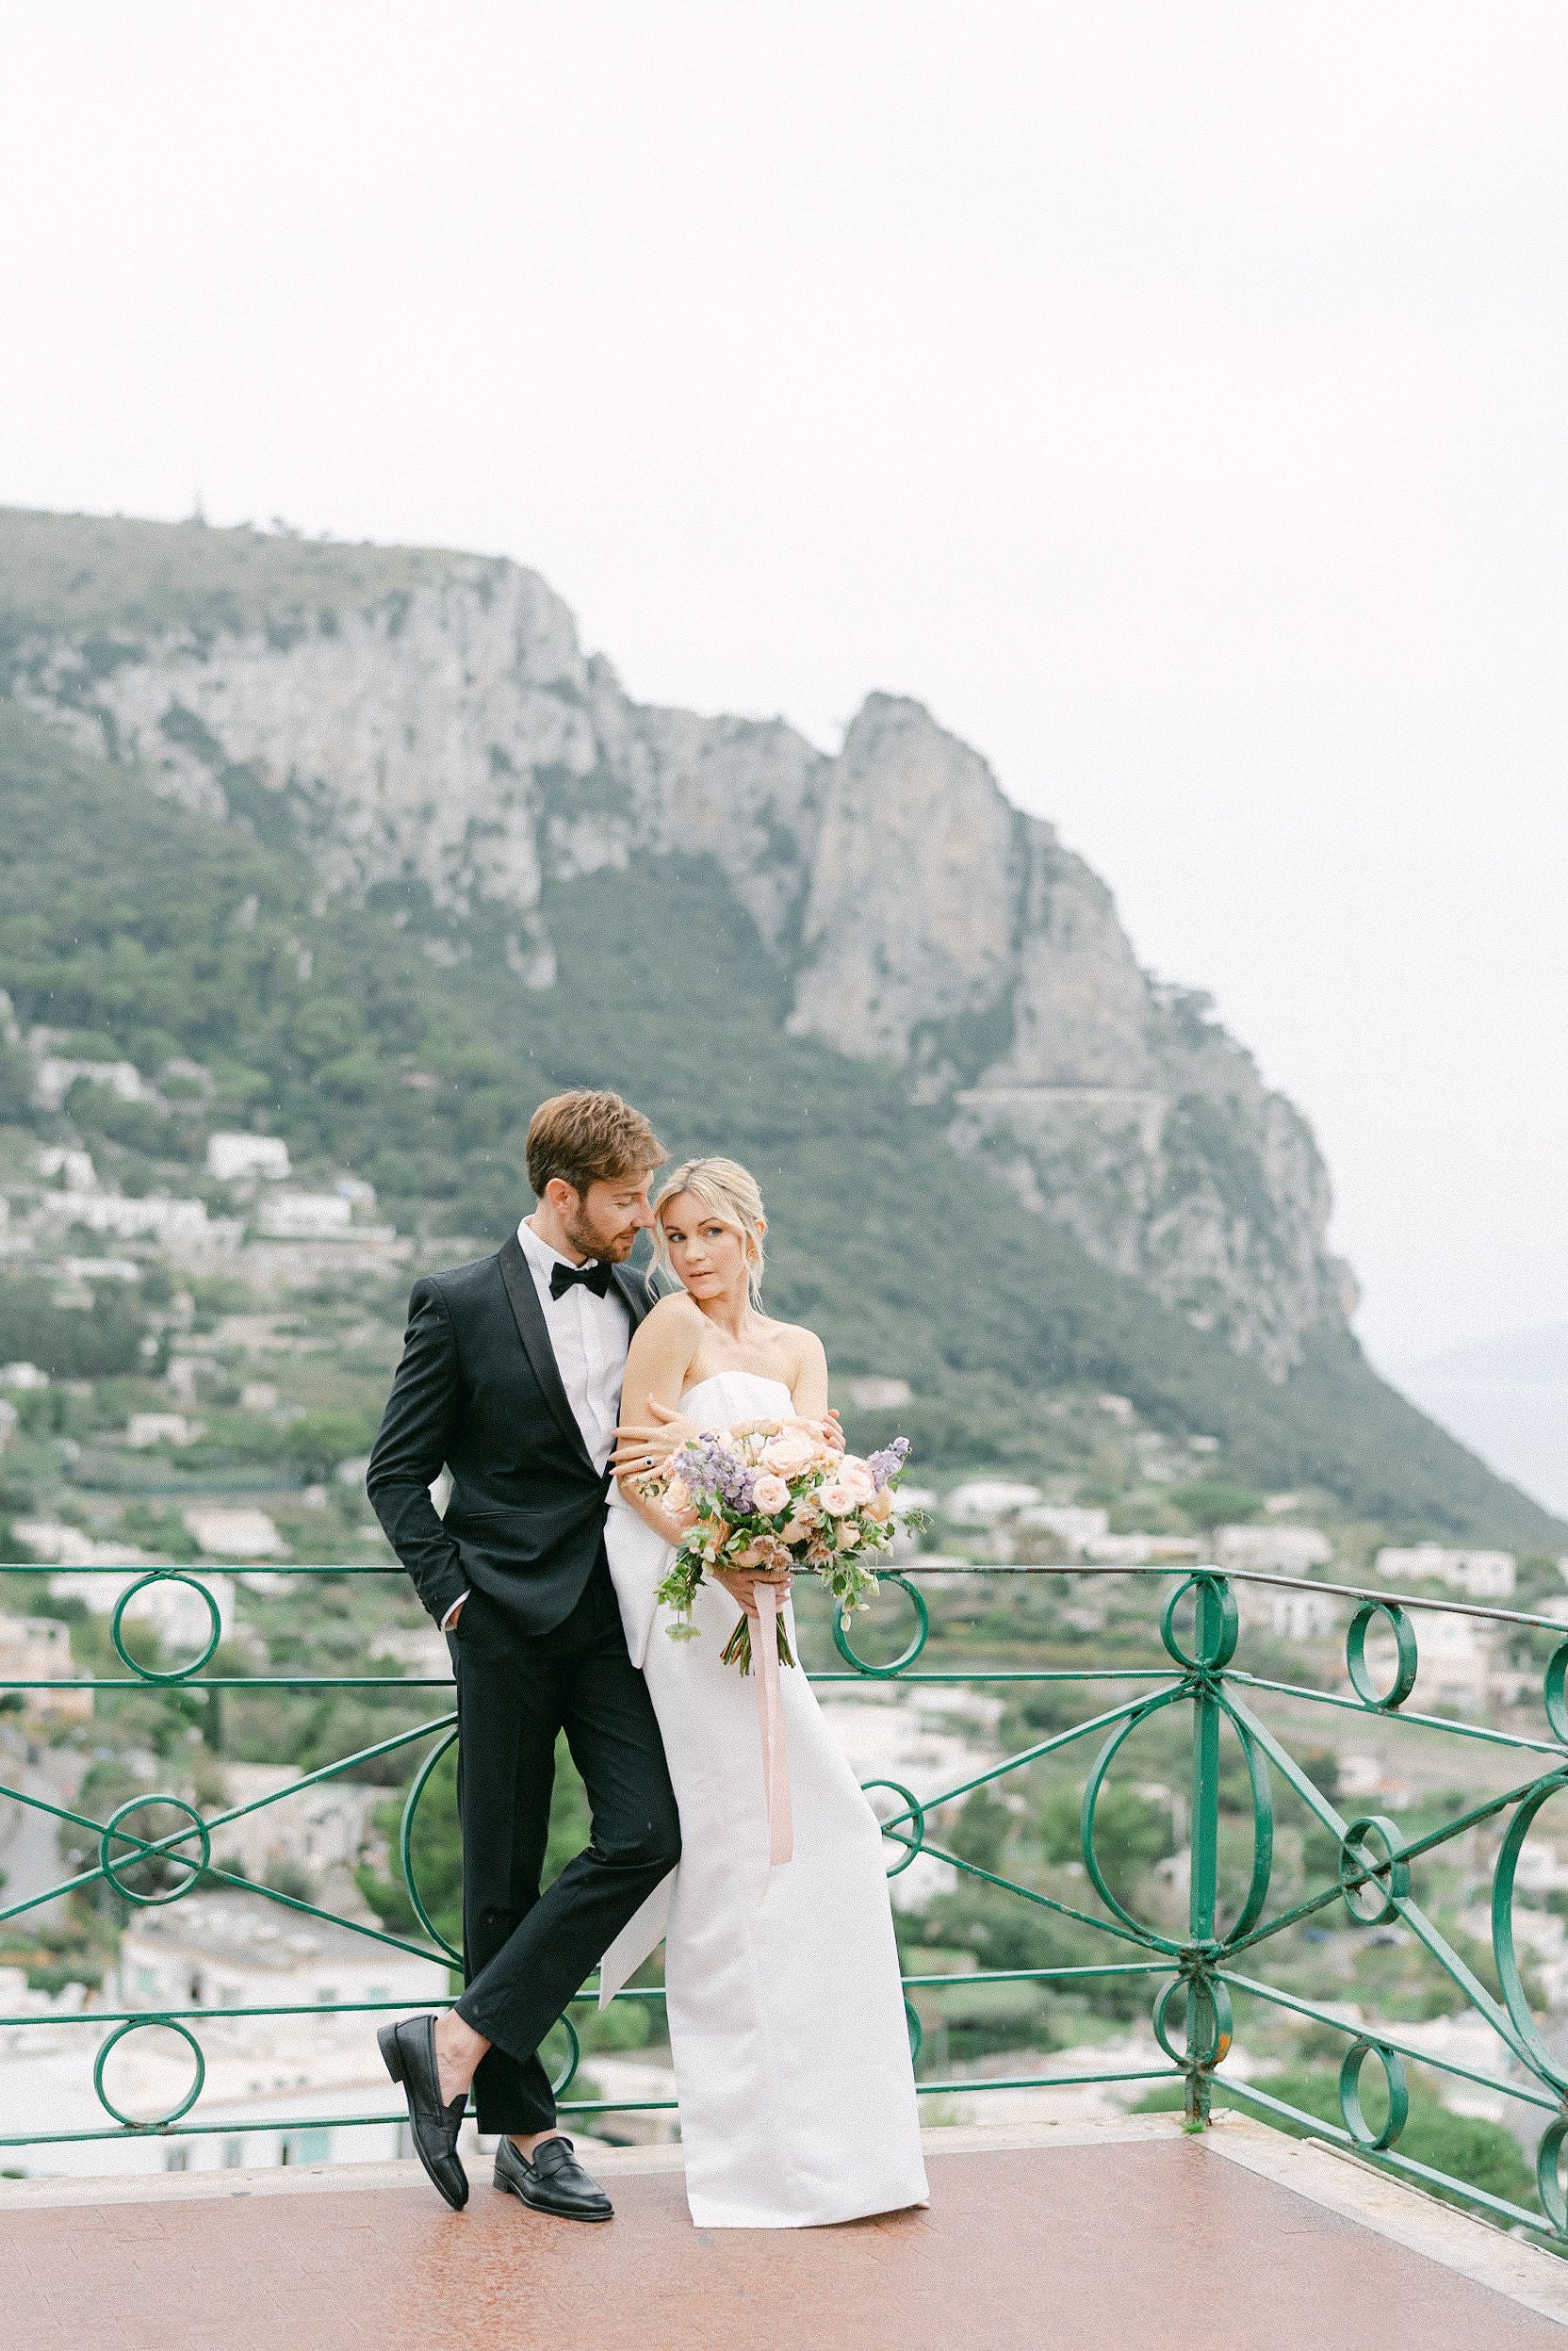 Romance on the Riviera: Why Amalfi is the Perfect Wedding Destination